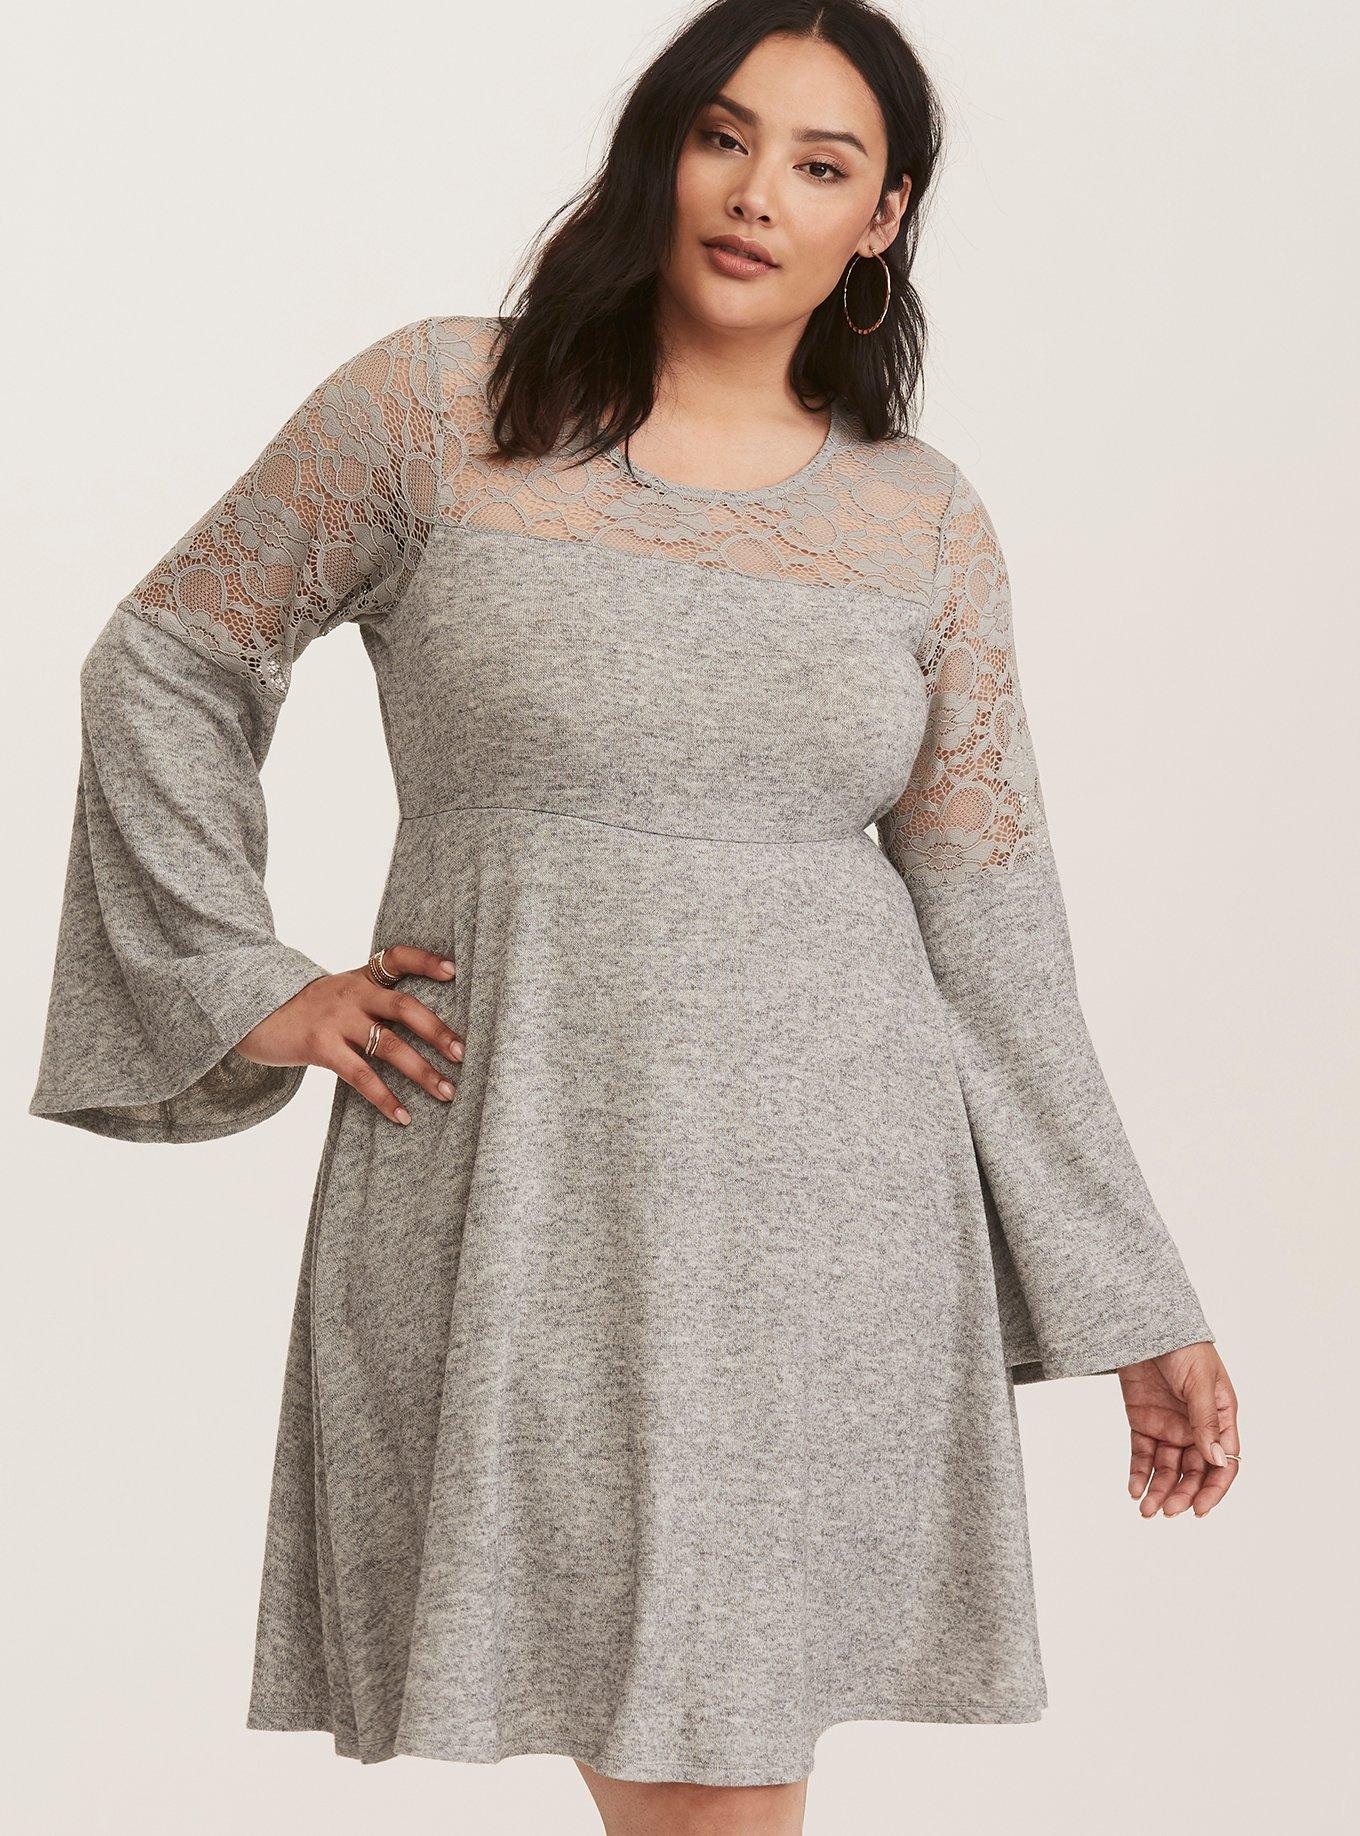 Plus Size - Grey Bell Sleeve Lace Inset Woven Skater Dress - Torrid